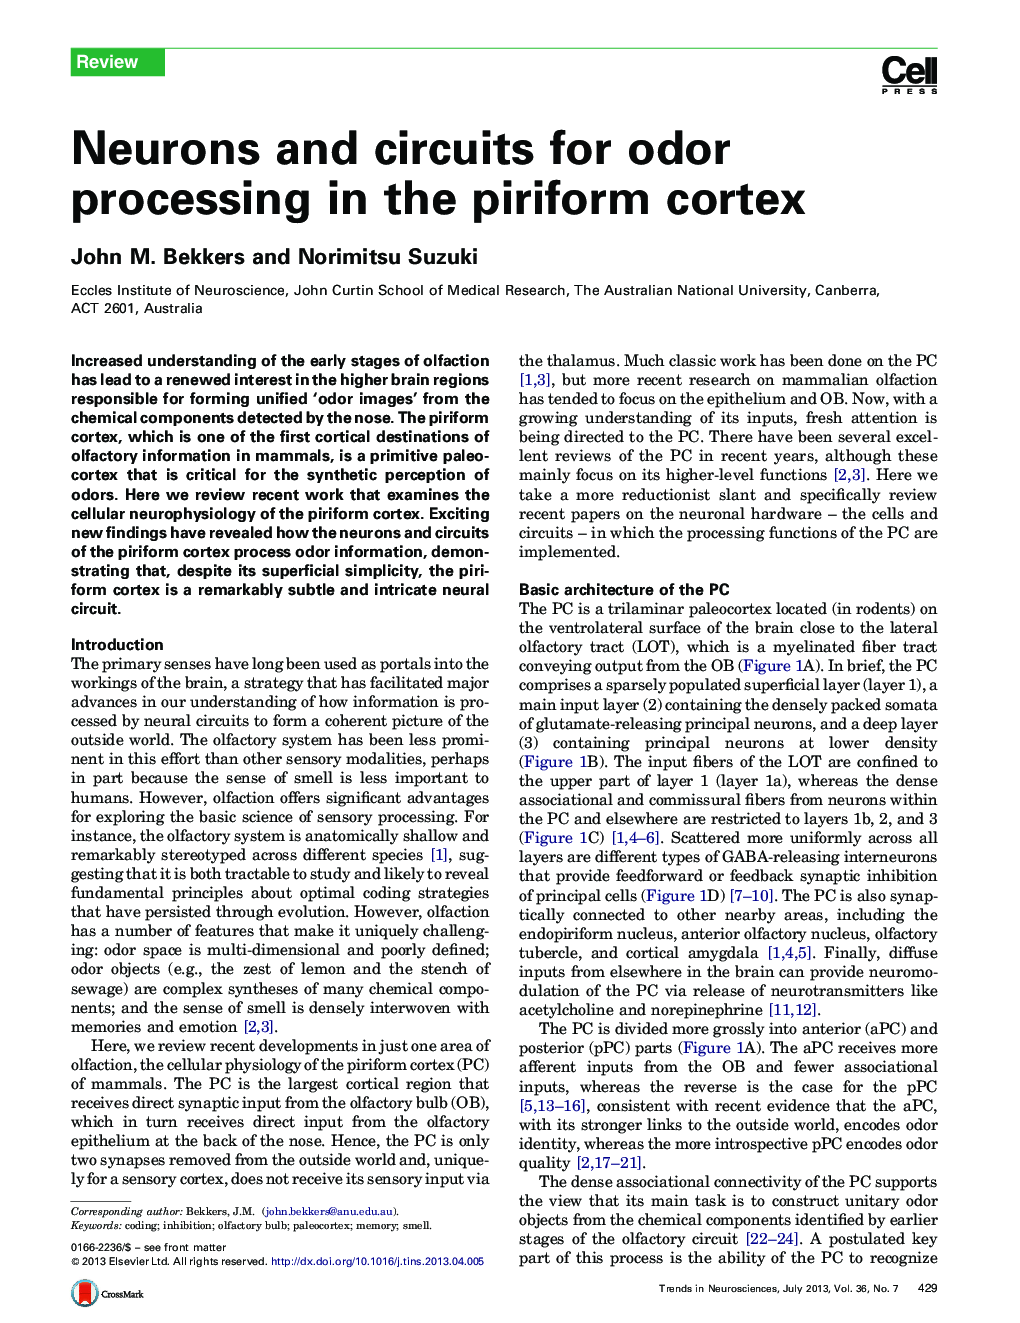 Neurons and circuits for odor processing in the piriform cortex